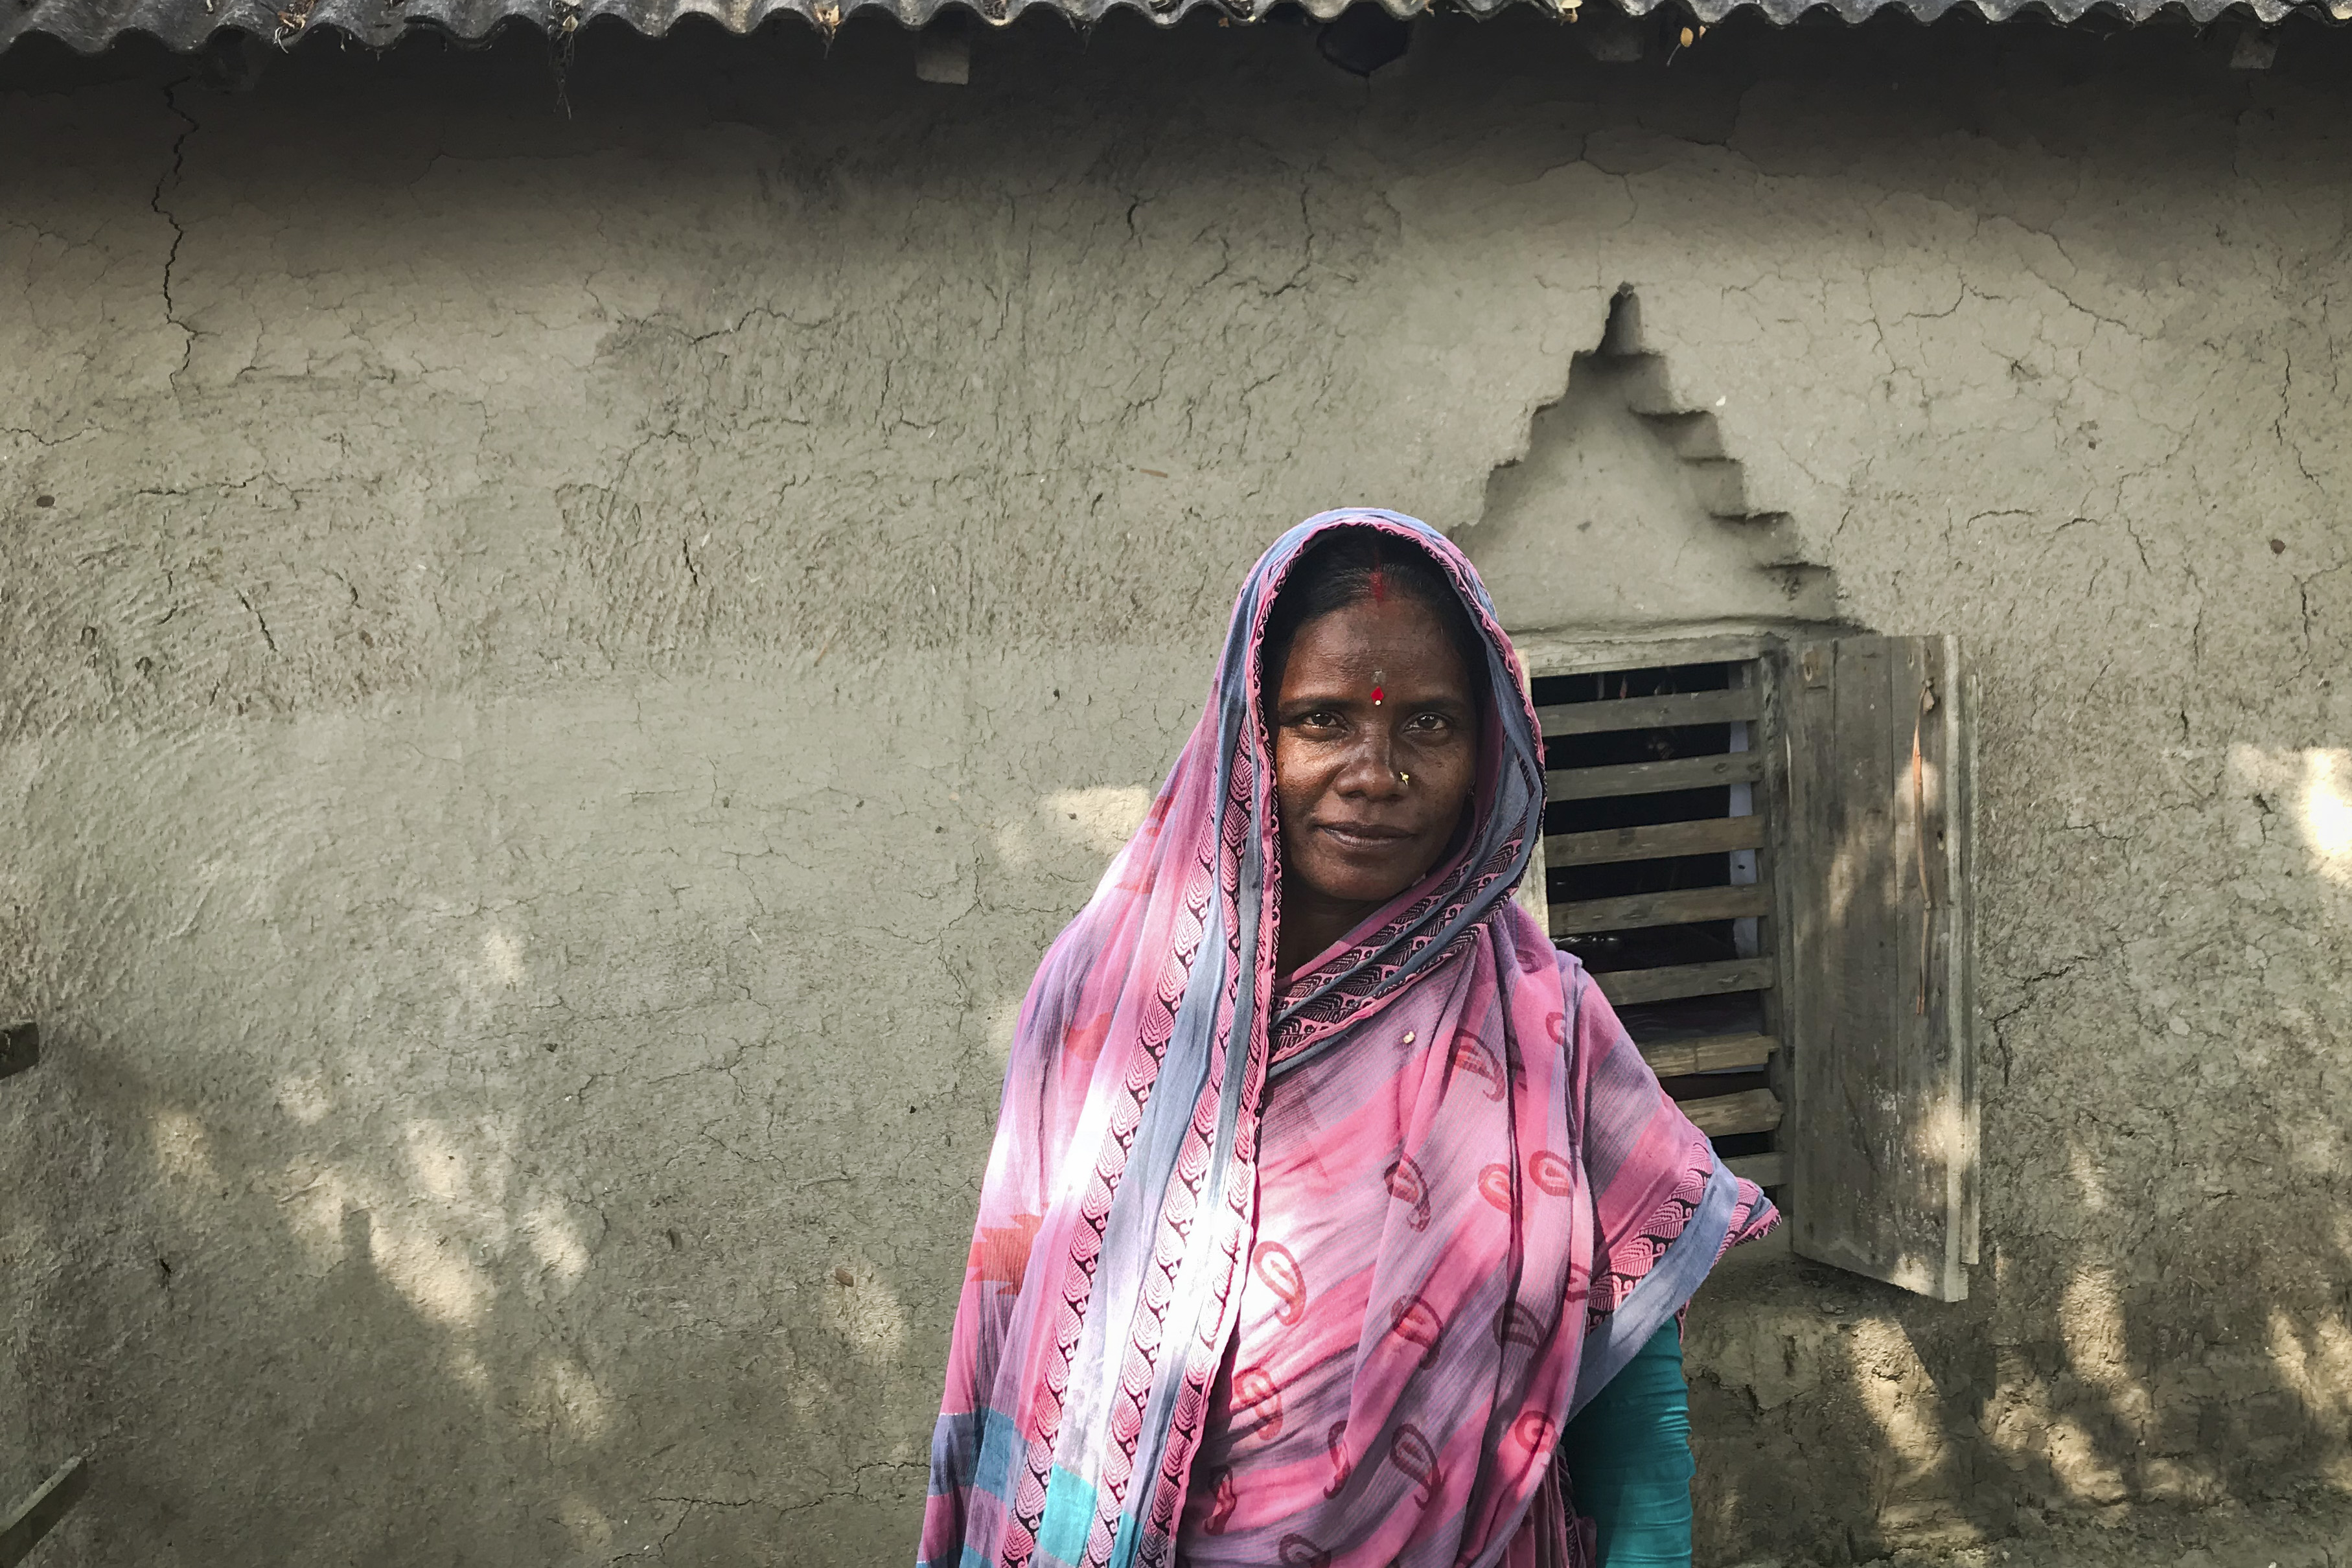 As sea levels rise in the Bay of Bengal, the Munda people struggle to hold on to their rituals